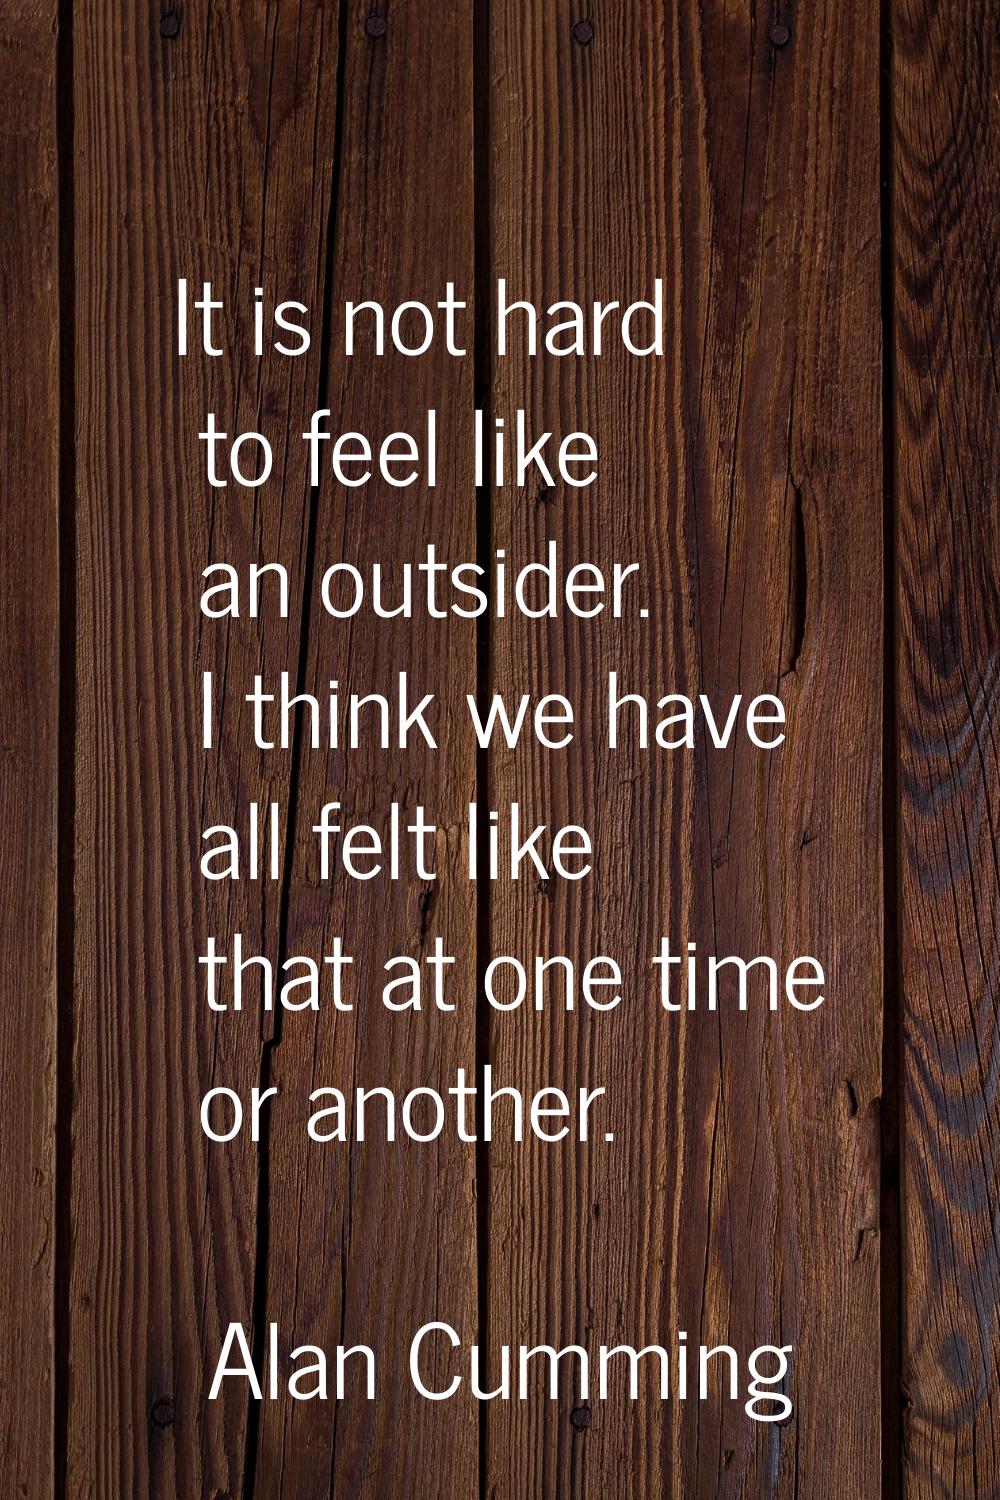 It is not hard to feel like an outsider. I think we have all felt like that at one time or another.